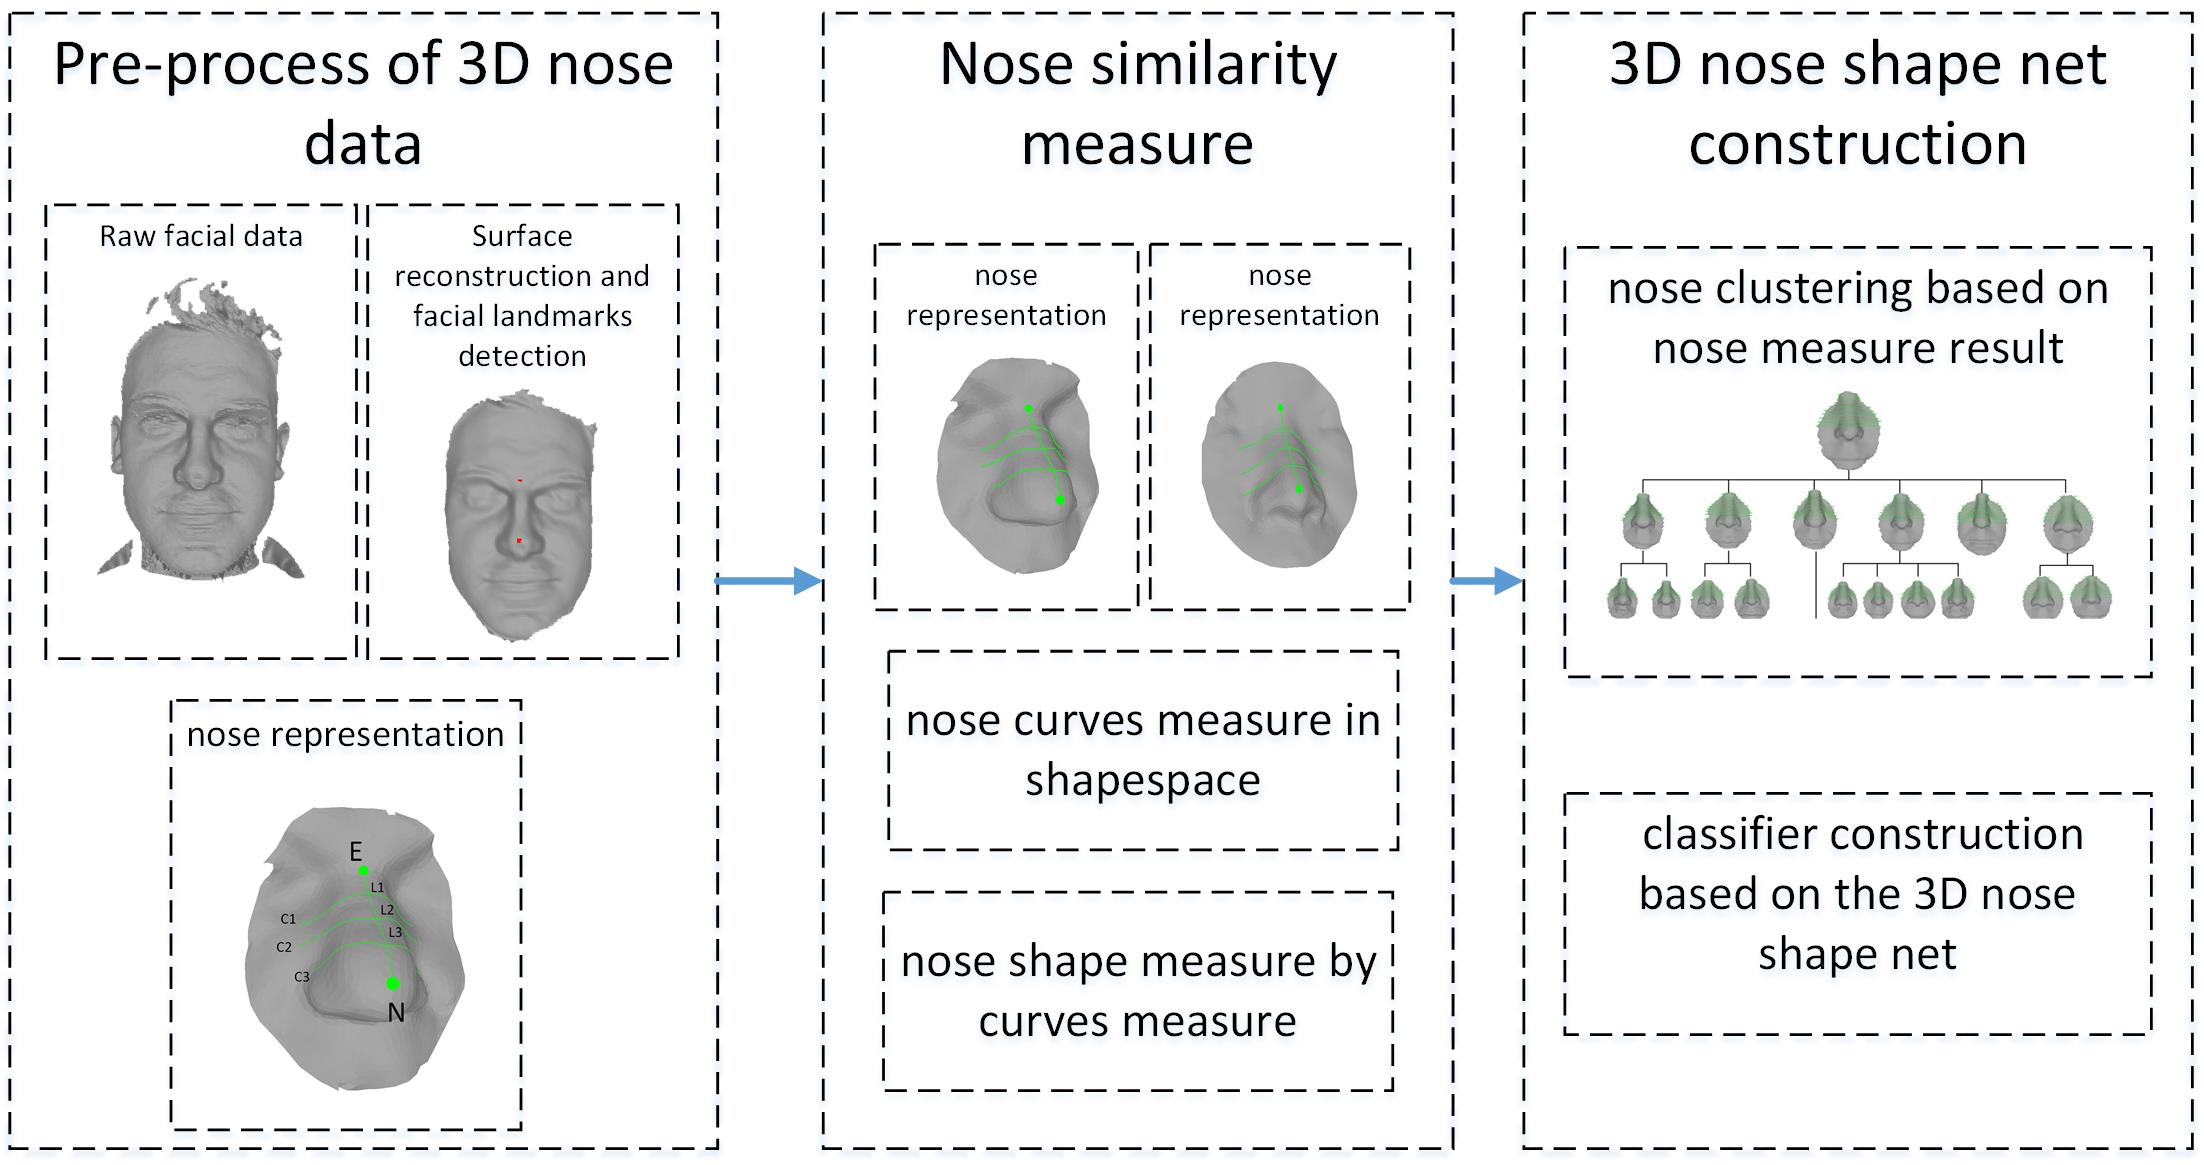 3D Nose shape net for human gender and ethnicity classification.